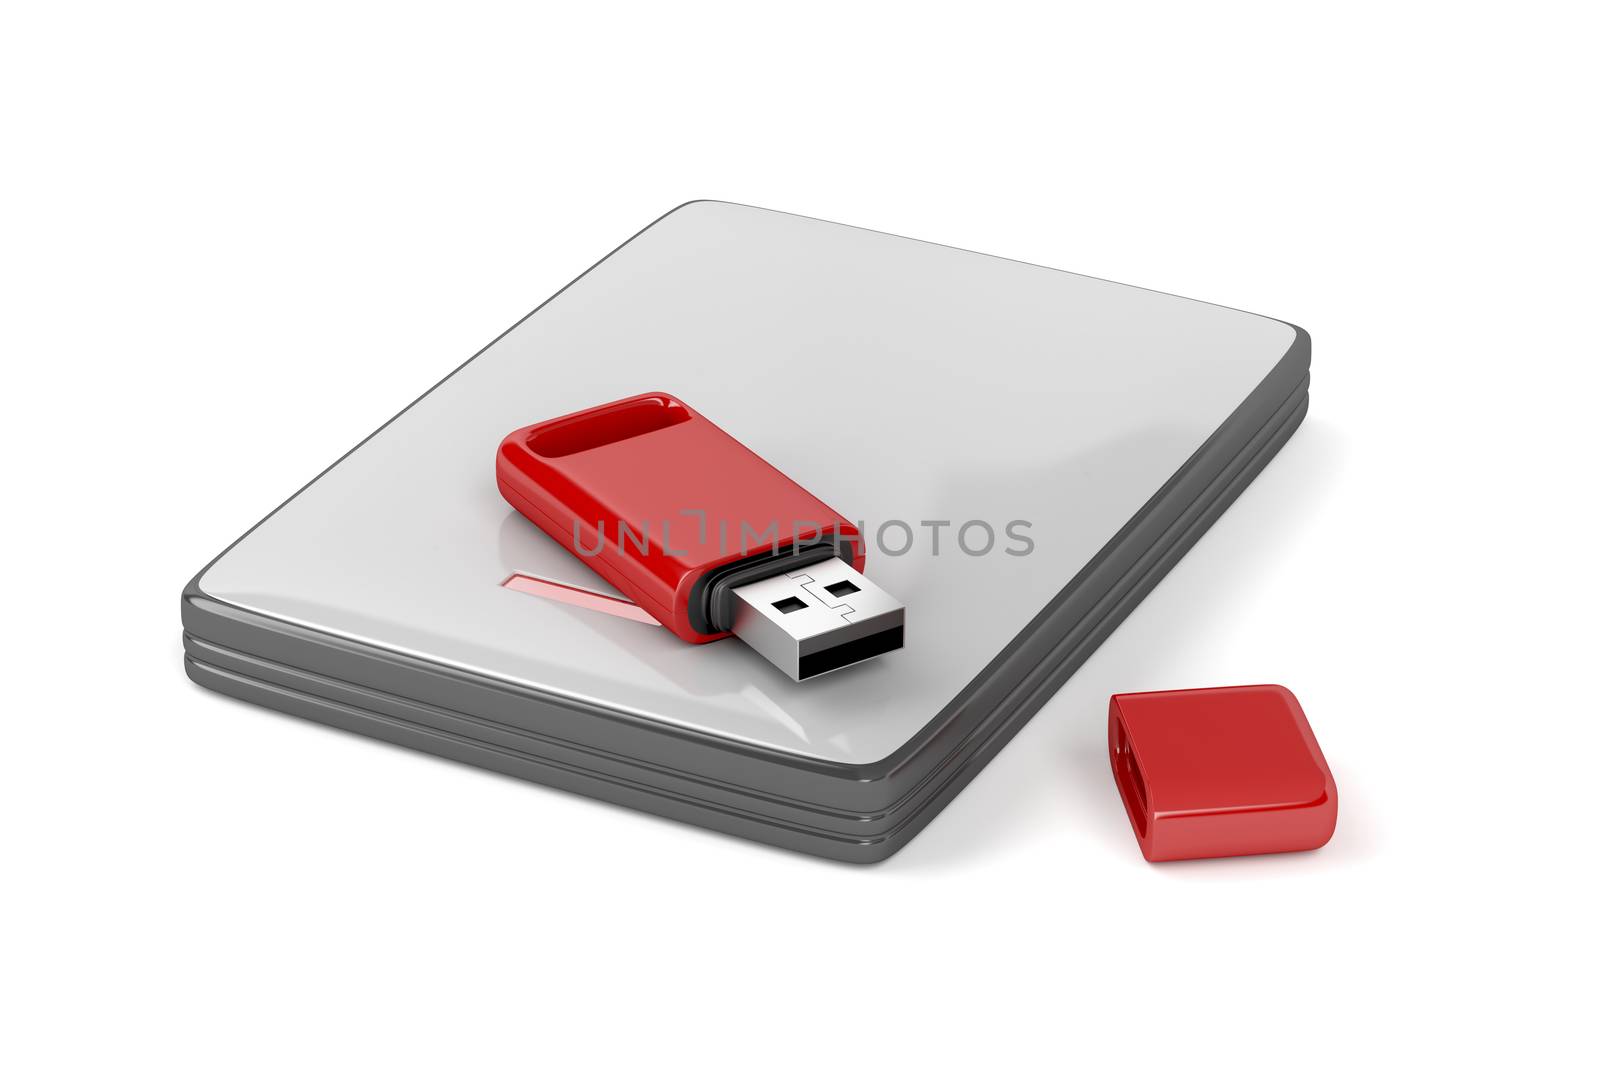 Usb stick and external hard drive on white background 